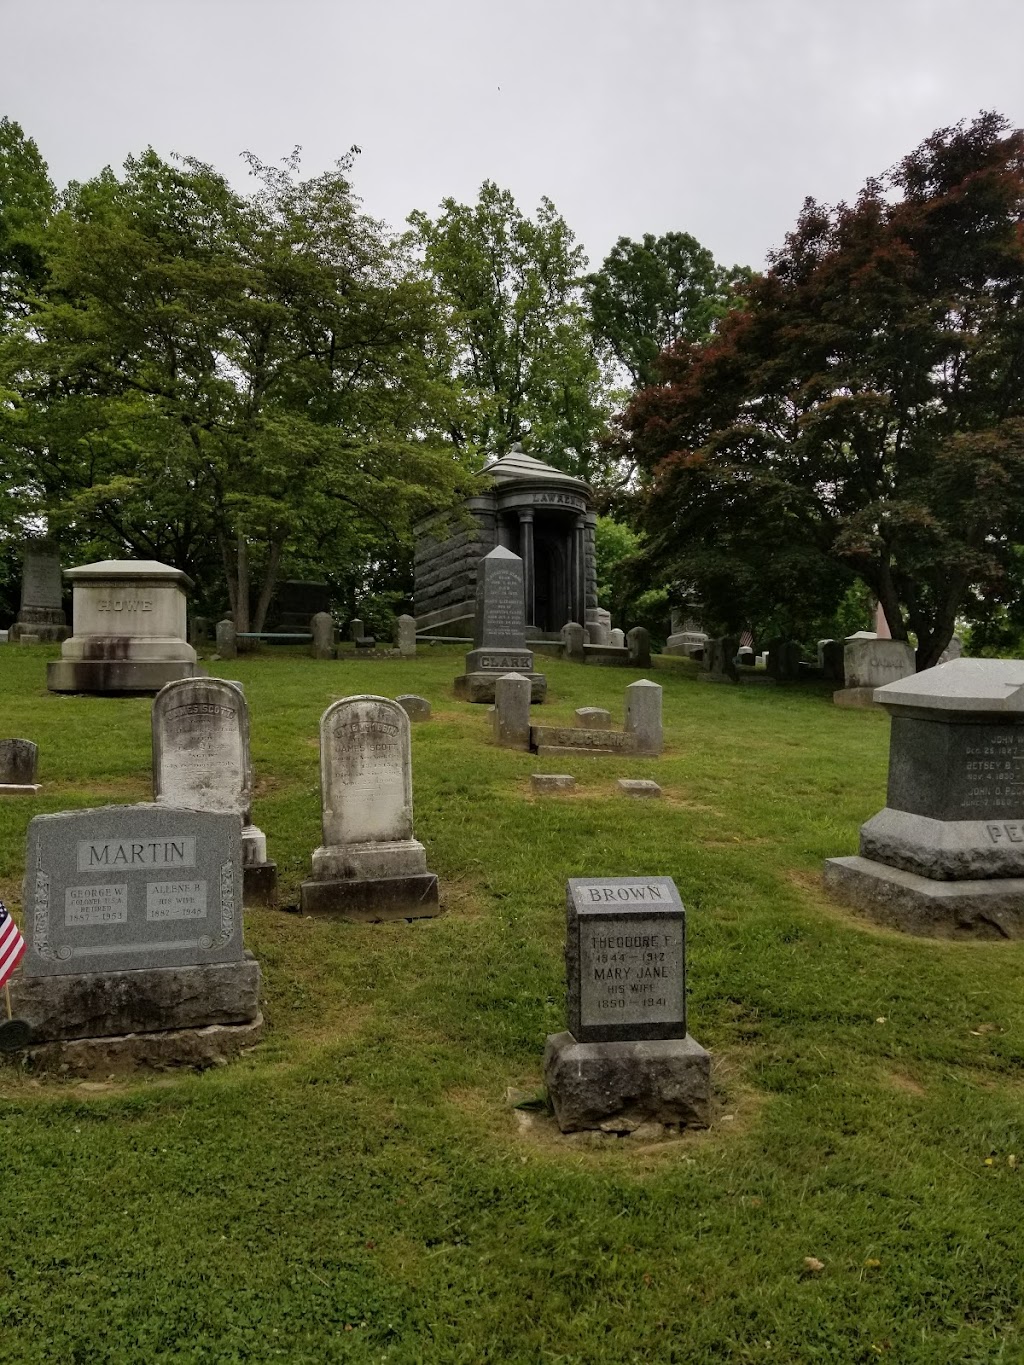 Dale Cemetery | 104 Havell St, Ossining, NY 10562 | Phone: (914) 941-1155